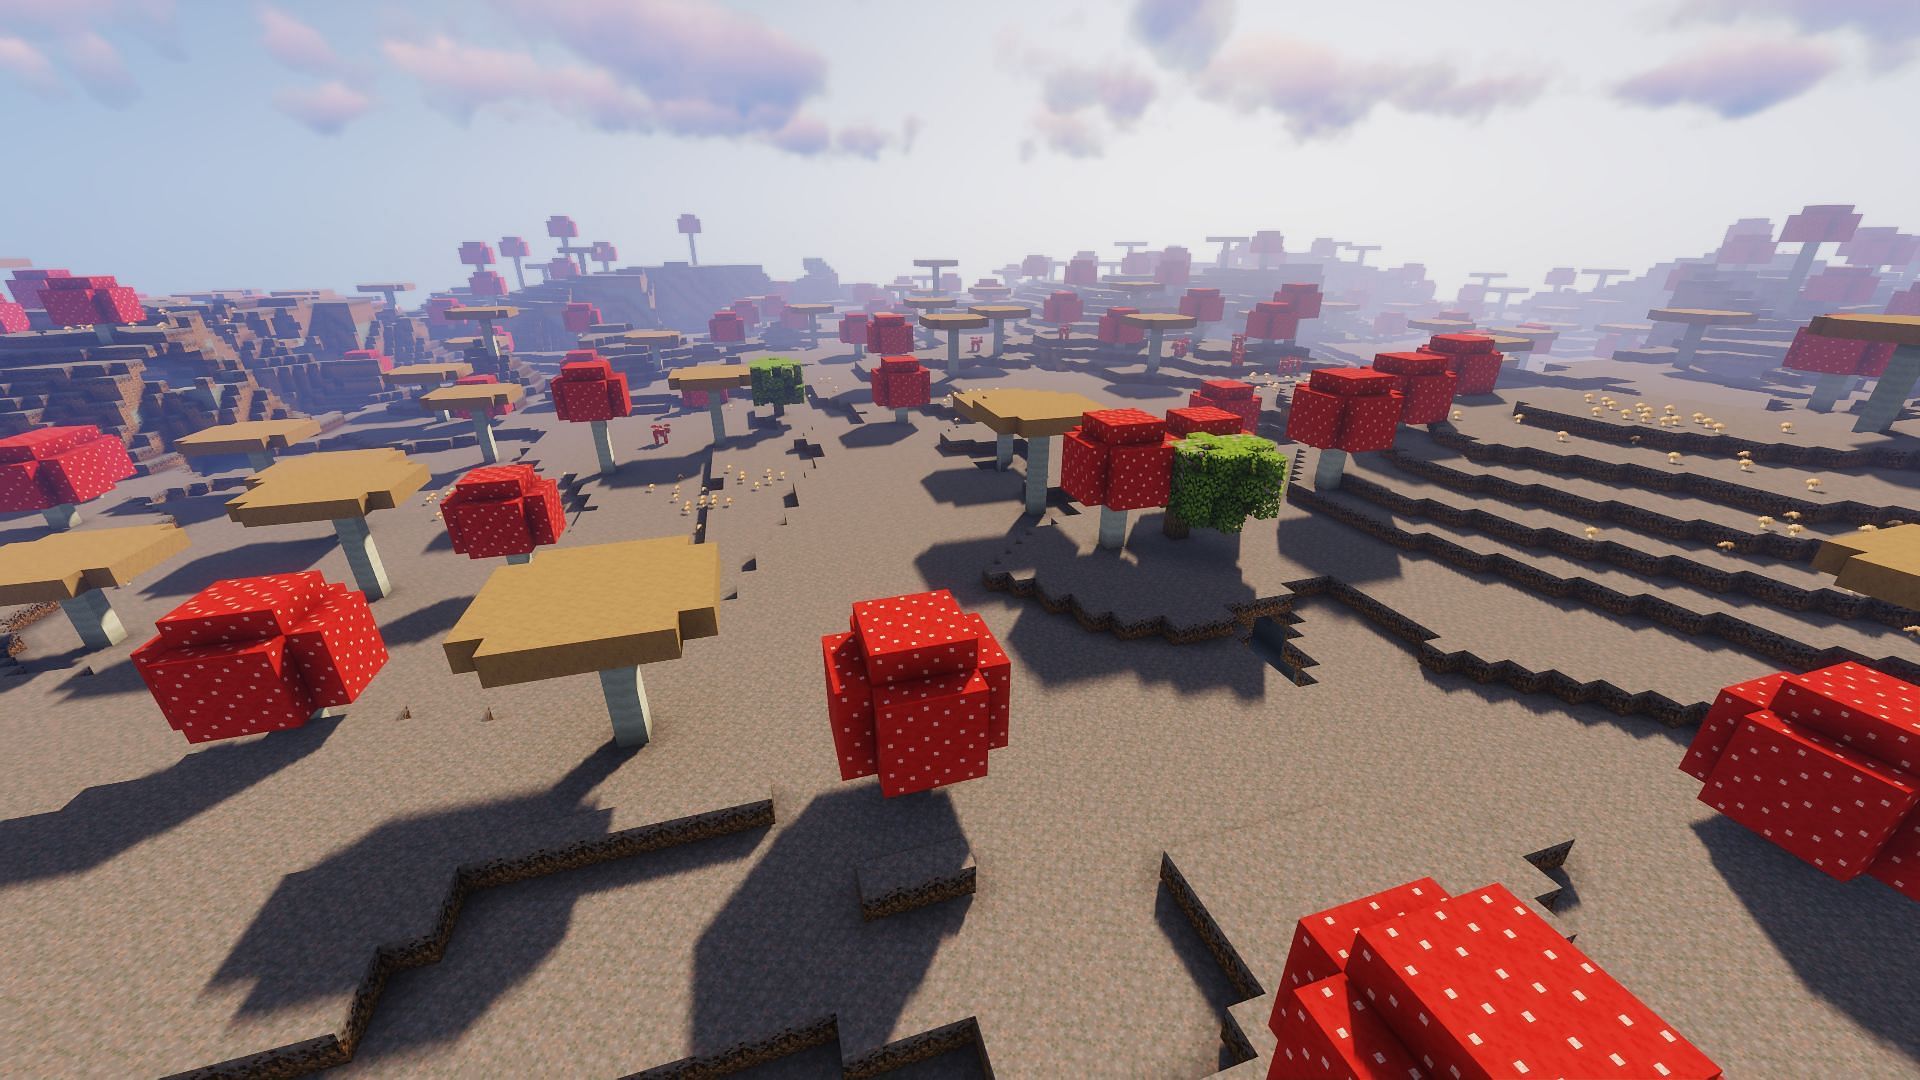 The large mushroom biome that players spawn next to, featured in one of the seeds below (Image via Minecraft)